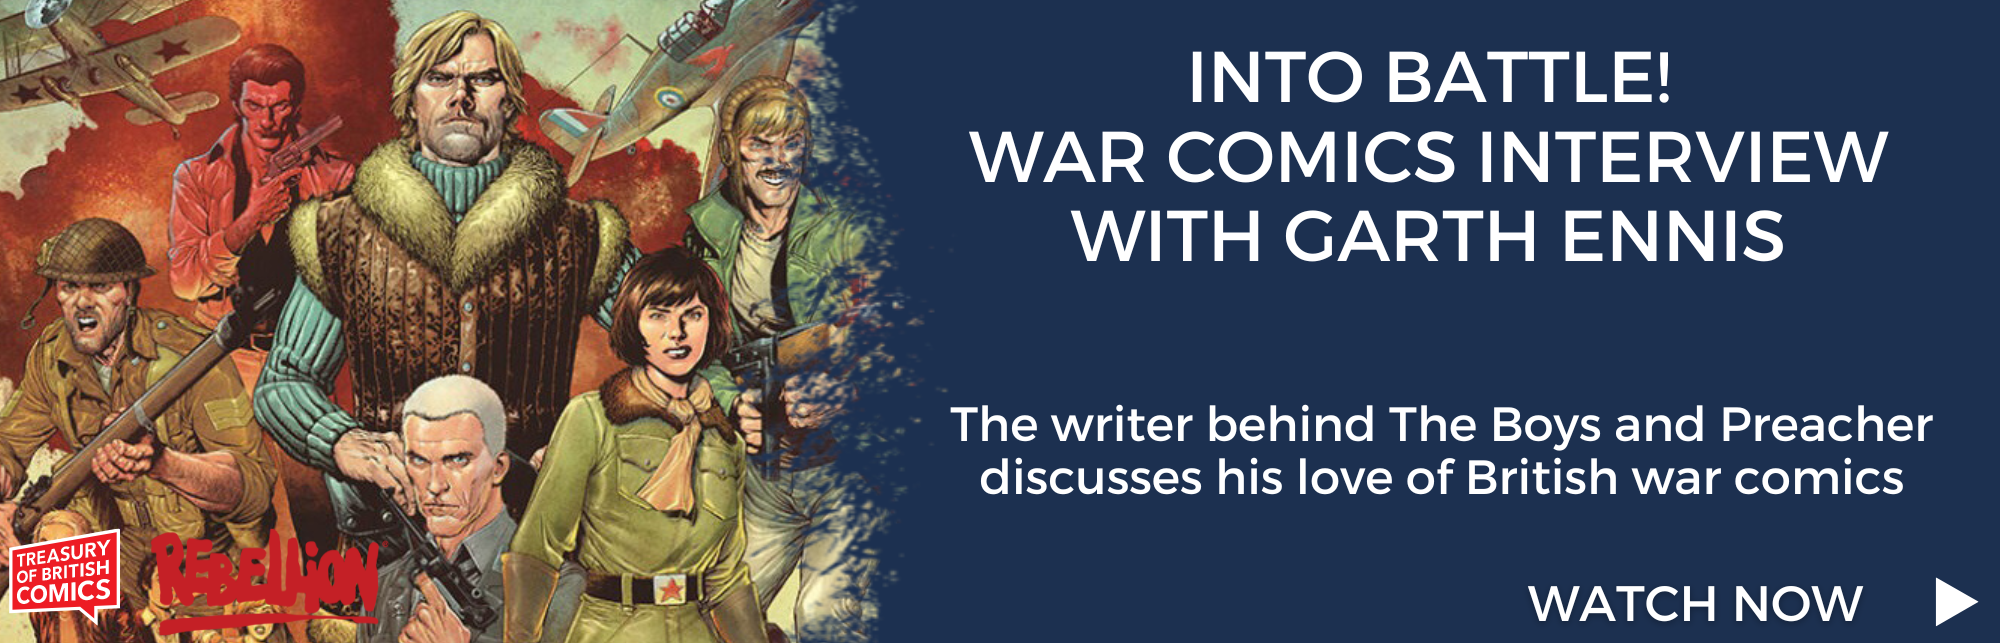 Click here to watch the online interview and live audience Q&A with Garth Ennis on British war comics (available now)